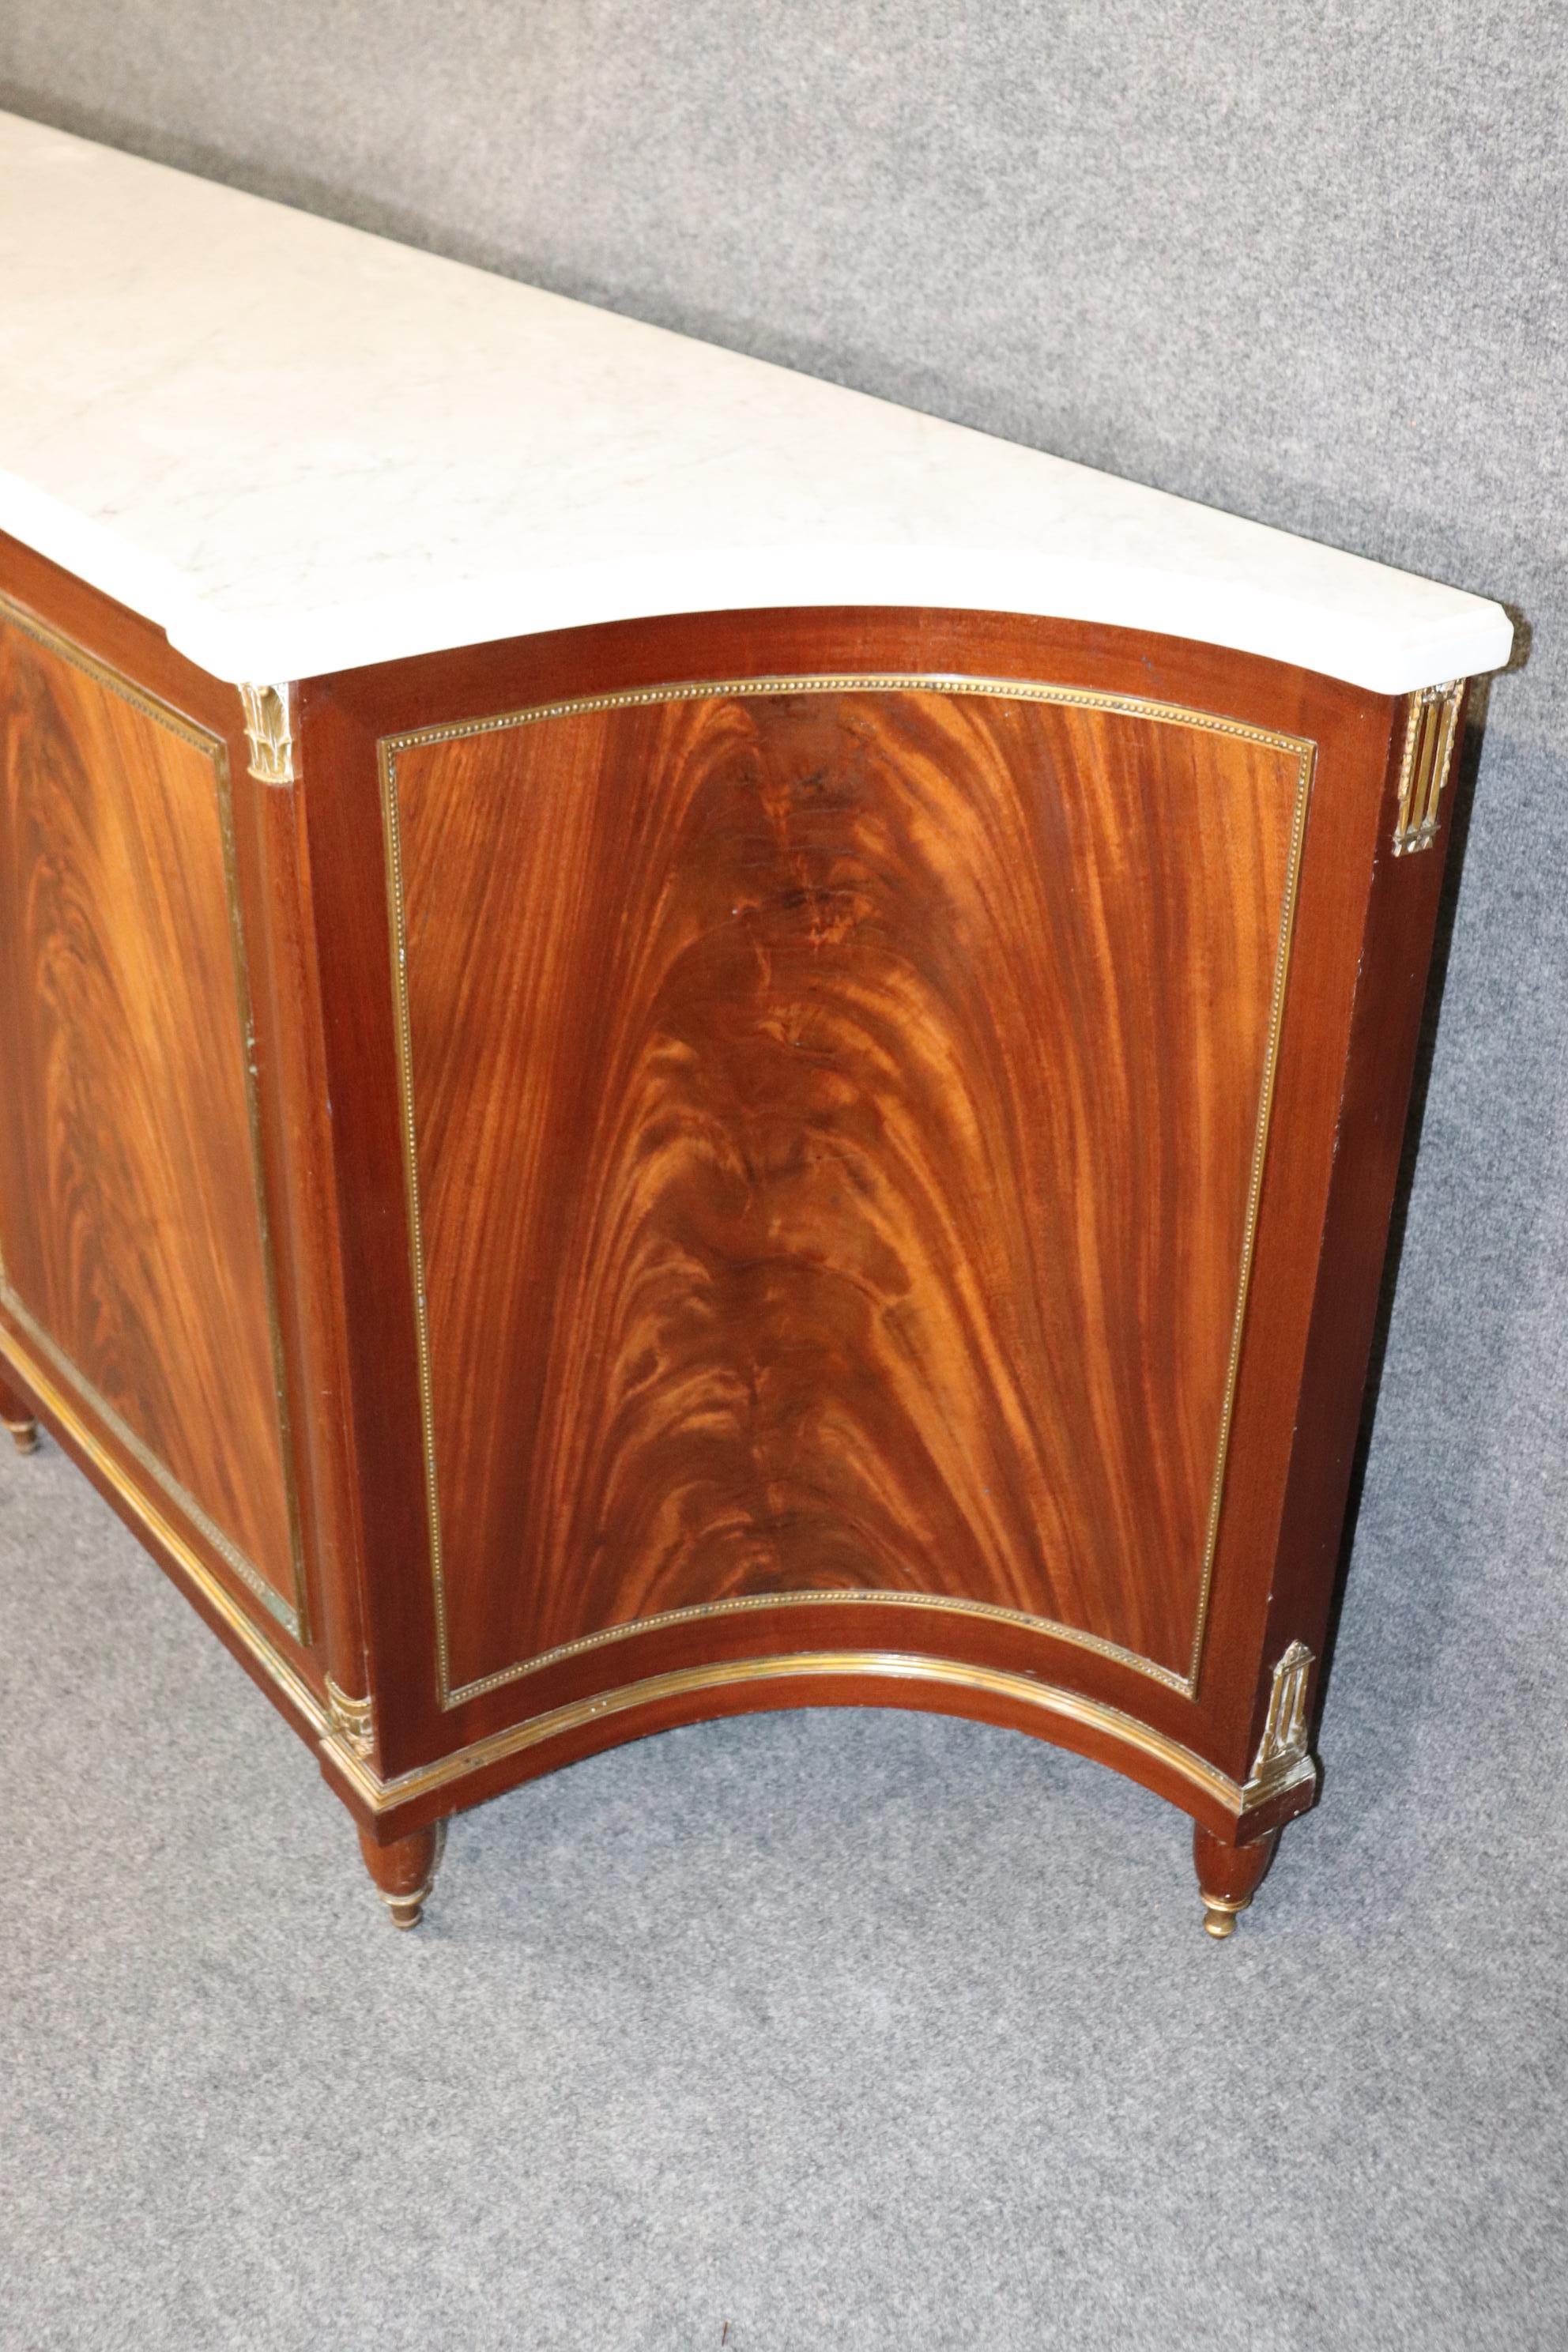 Dimensions- H: 35 1/2in W: 104in D: 21 1/4in 
This French Louis XVI Directoire Style Marble Top Sideboard Buffett By Maison Jansen is made of the highest quality and is bound to bring a sense of class and luxury into your home or place of choosing!